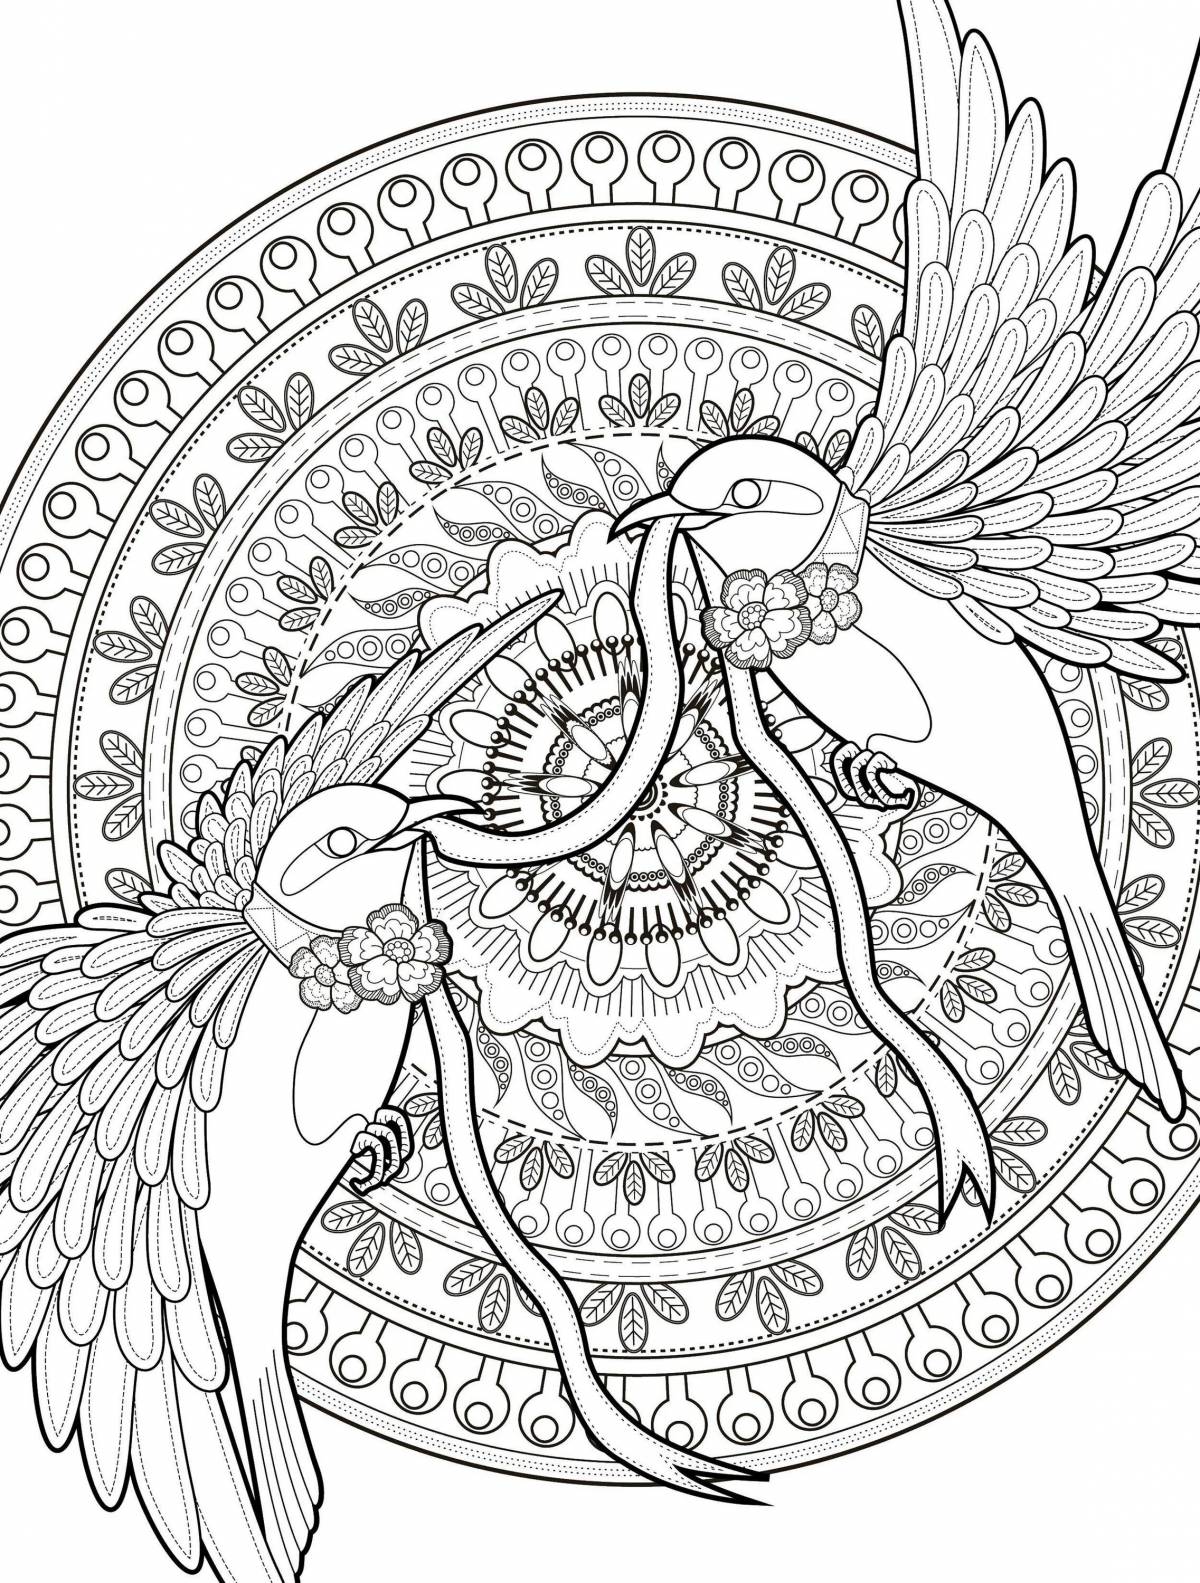 Exquisite meditation coloring book for adults